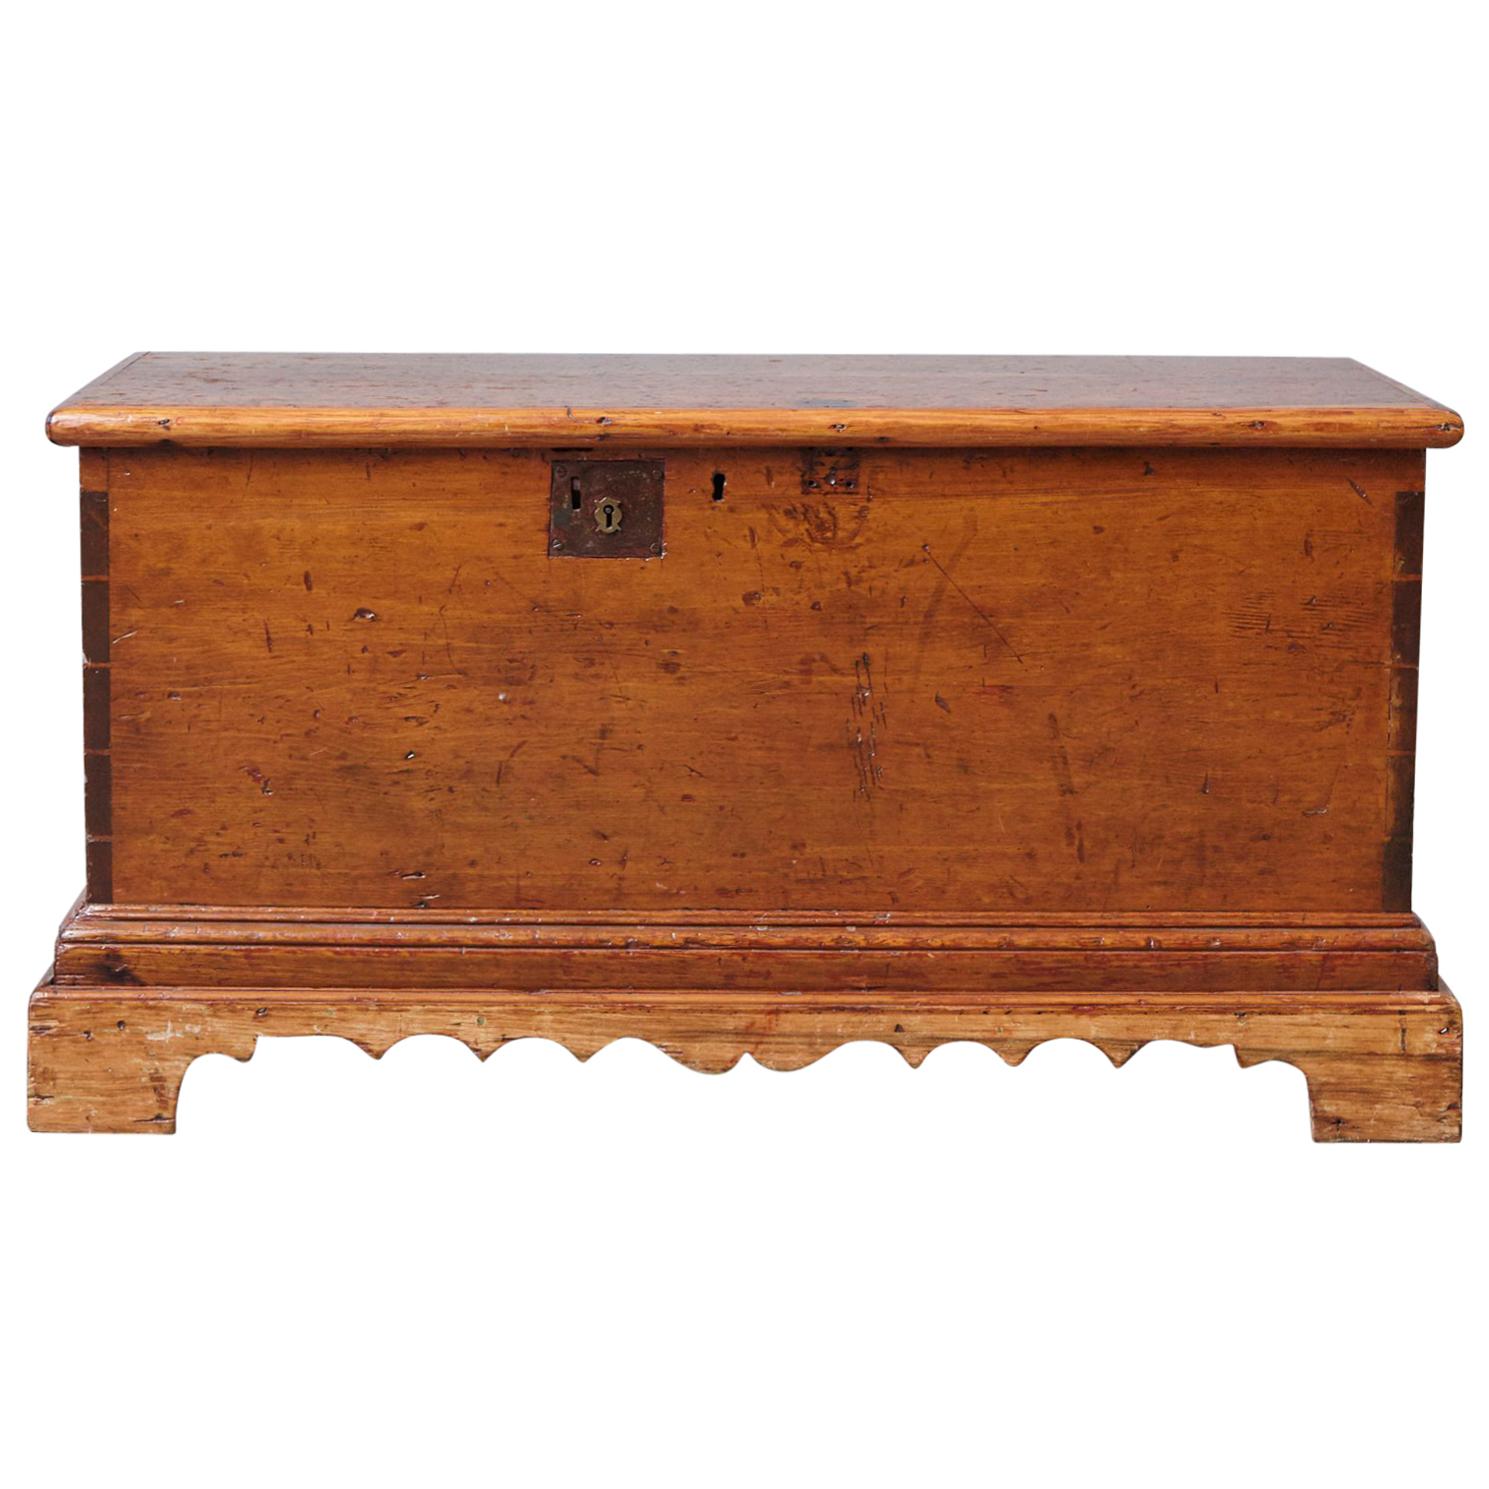 Early 19th Century American Pine Blanket Chest or Trunk, circa 1820s